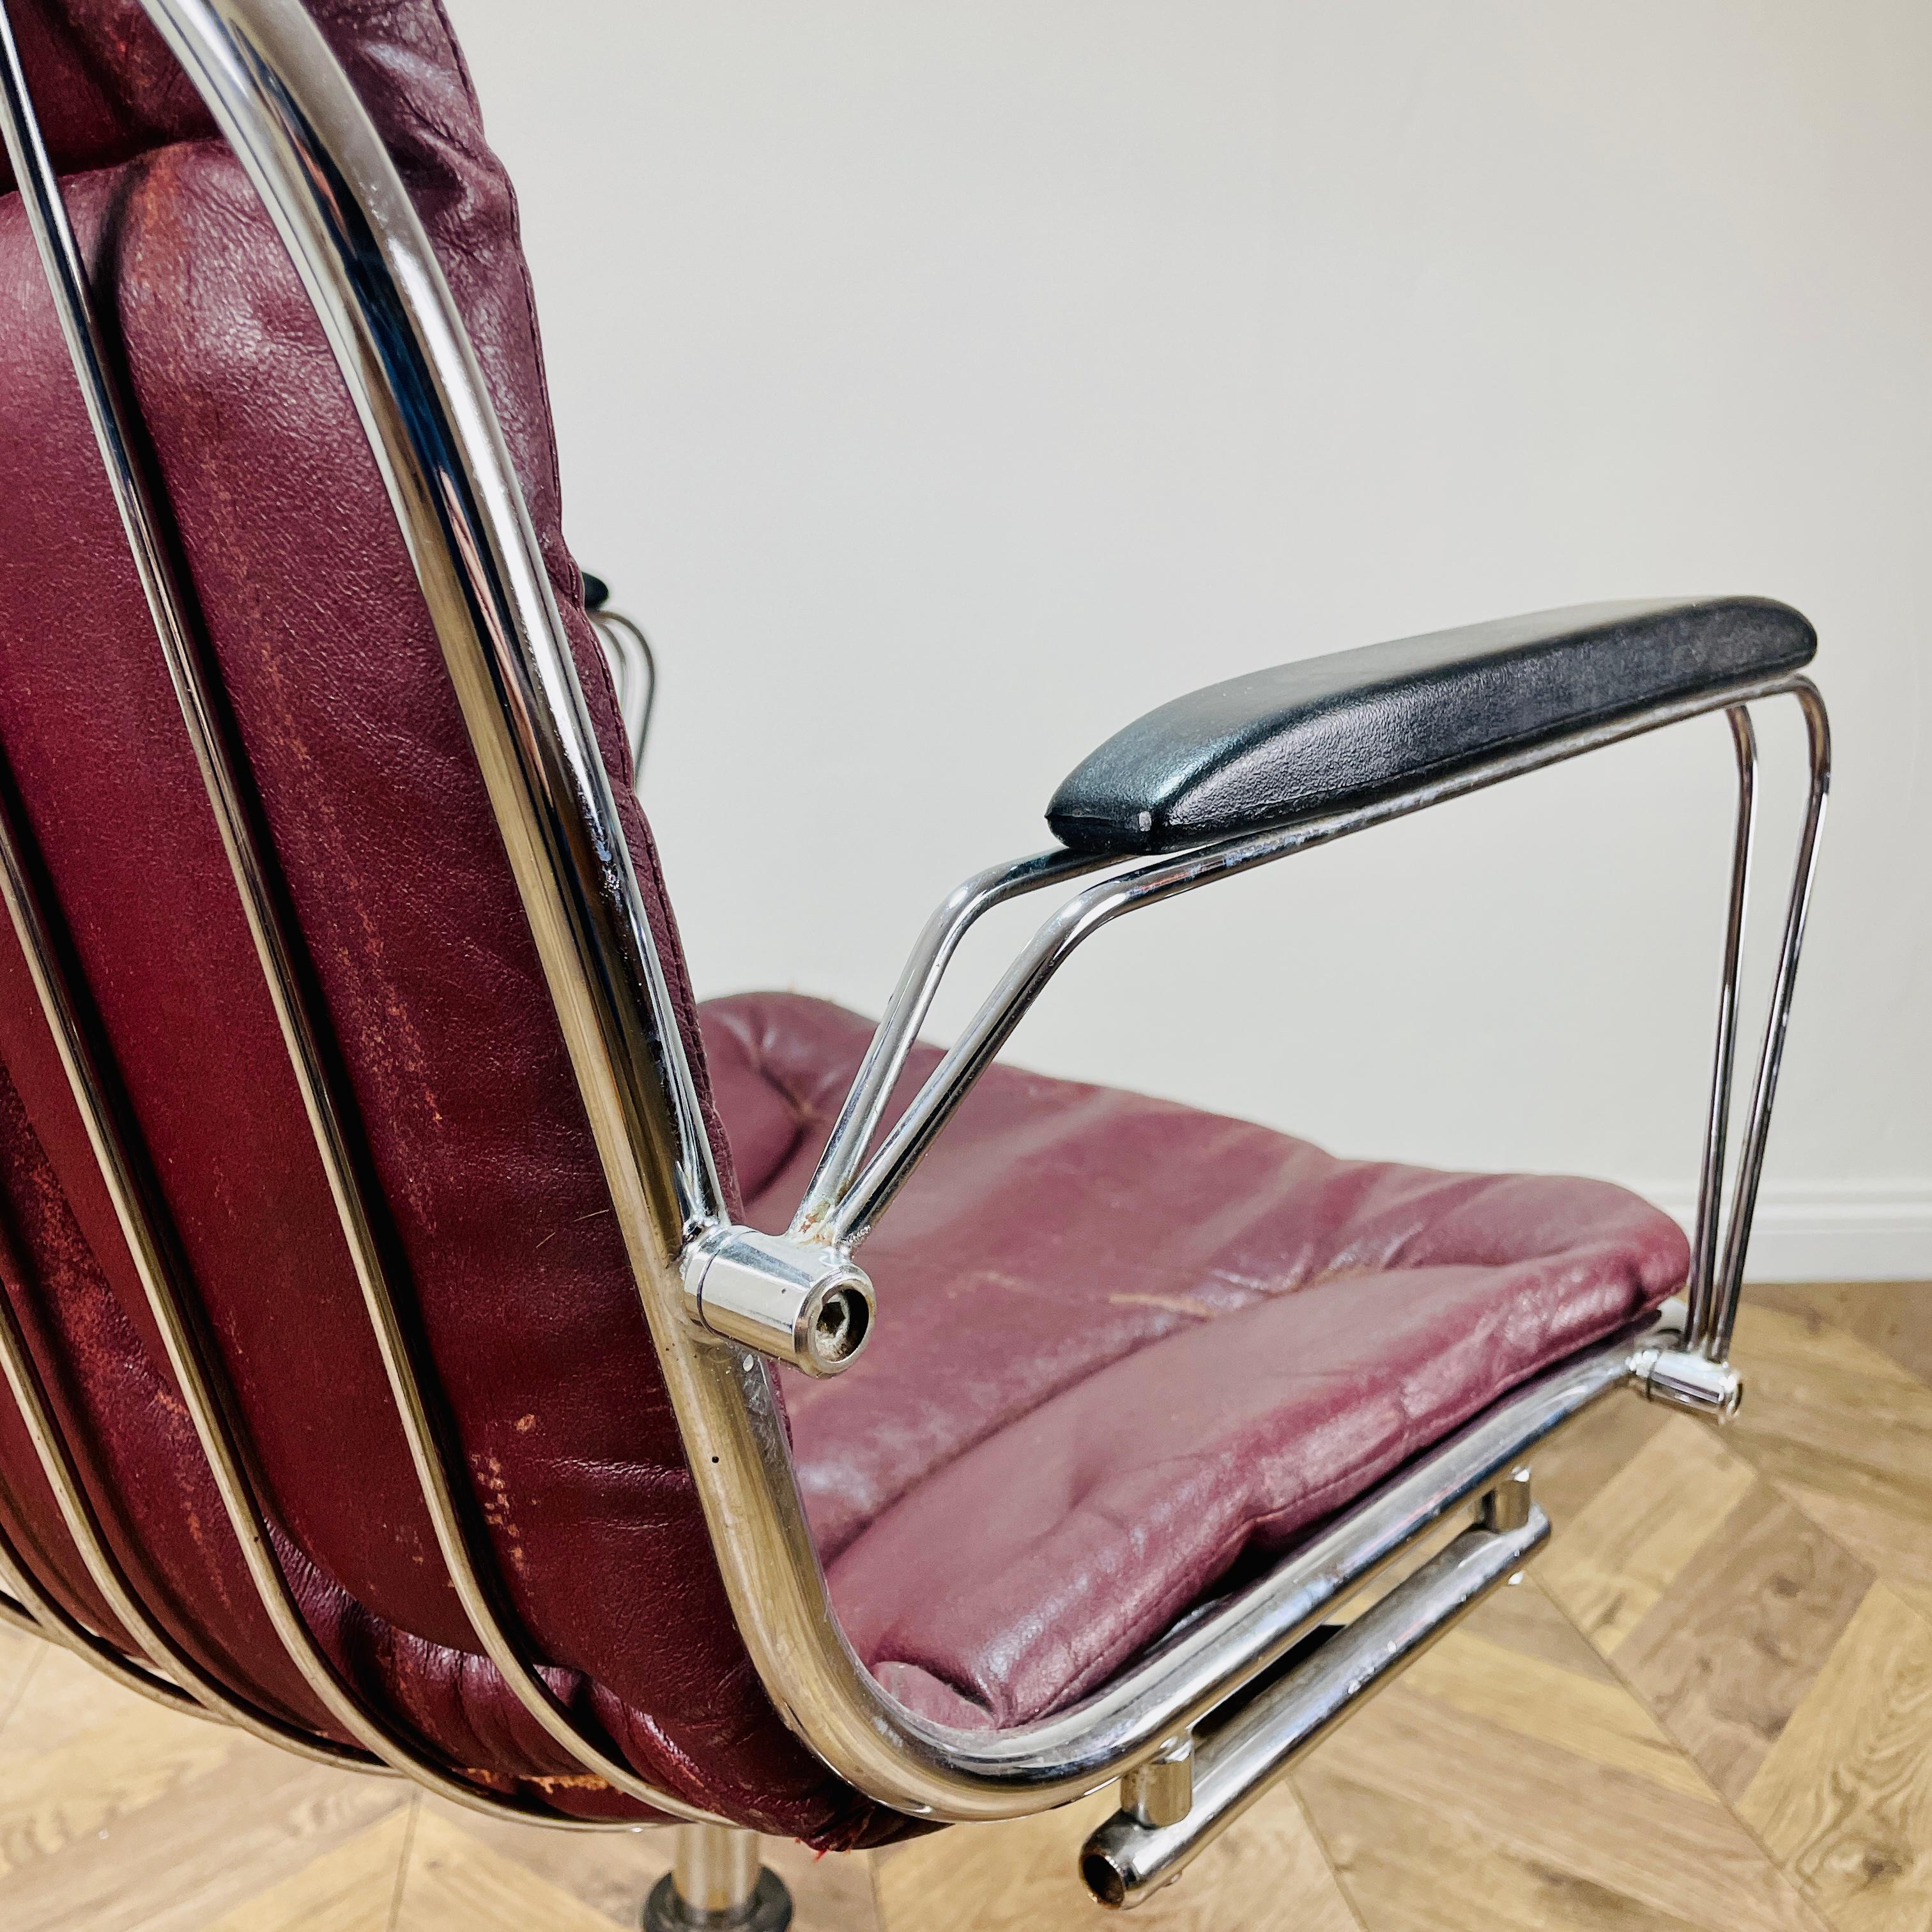 A Beautiful Vintage midcentury Chrome & Leather Desk Chair attributed to Gastone Rinaldi, circa 1970s. Made in Italy.

The chair is made from chrome with original dark red leather seat.

It is in great condition, but in-keeping with its age and